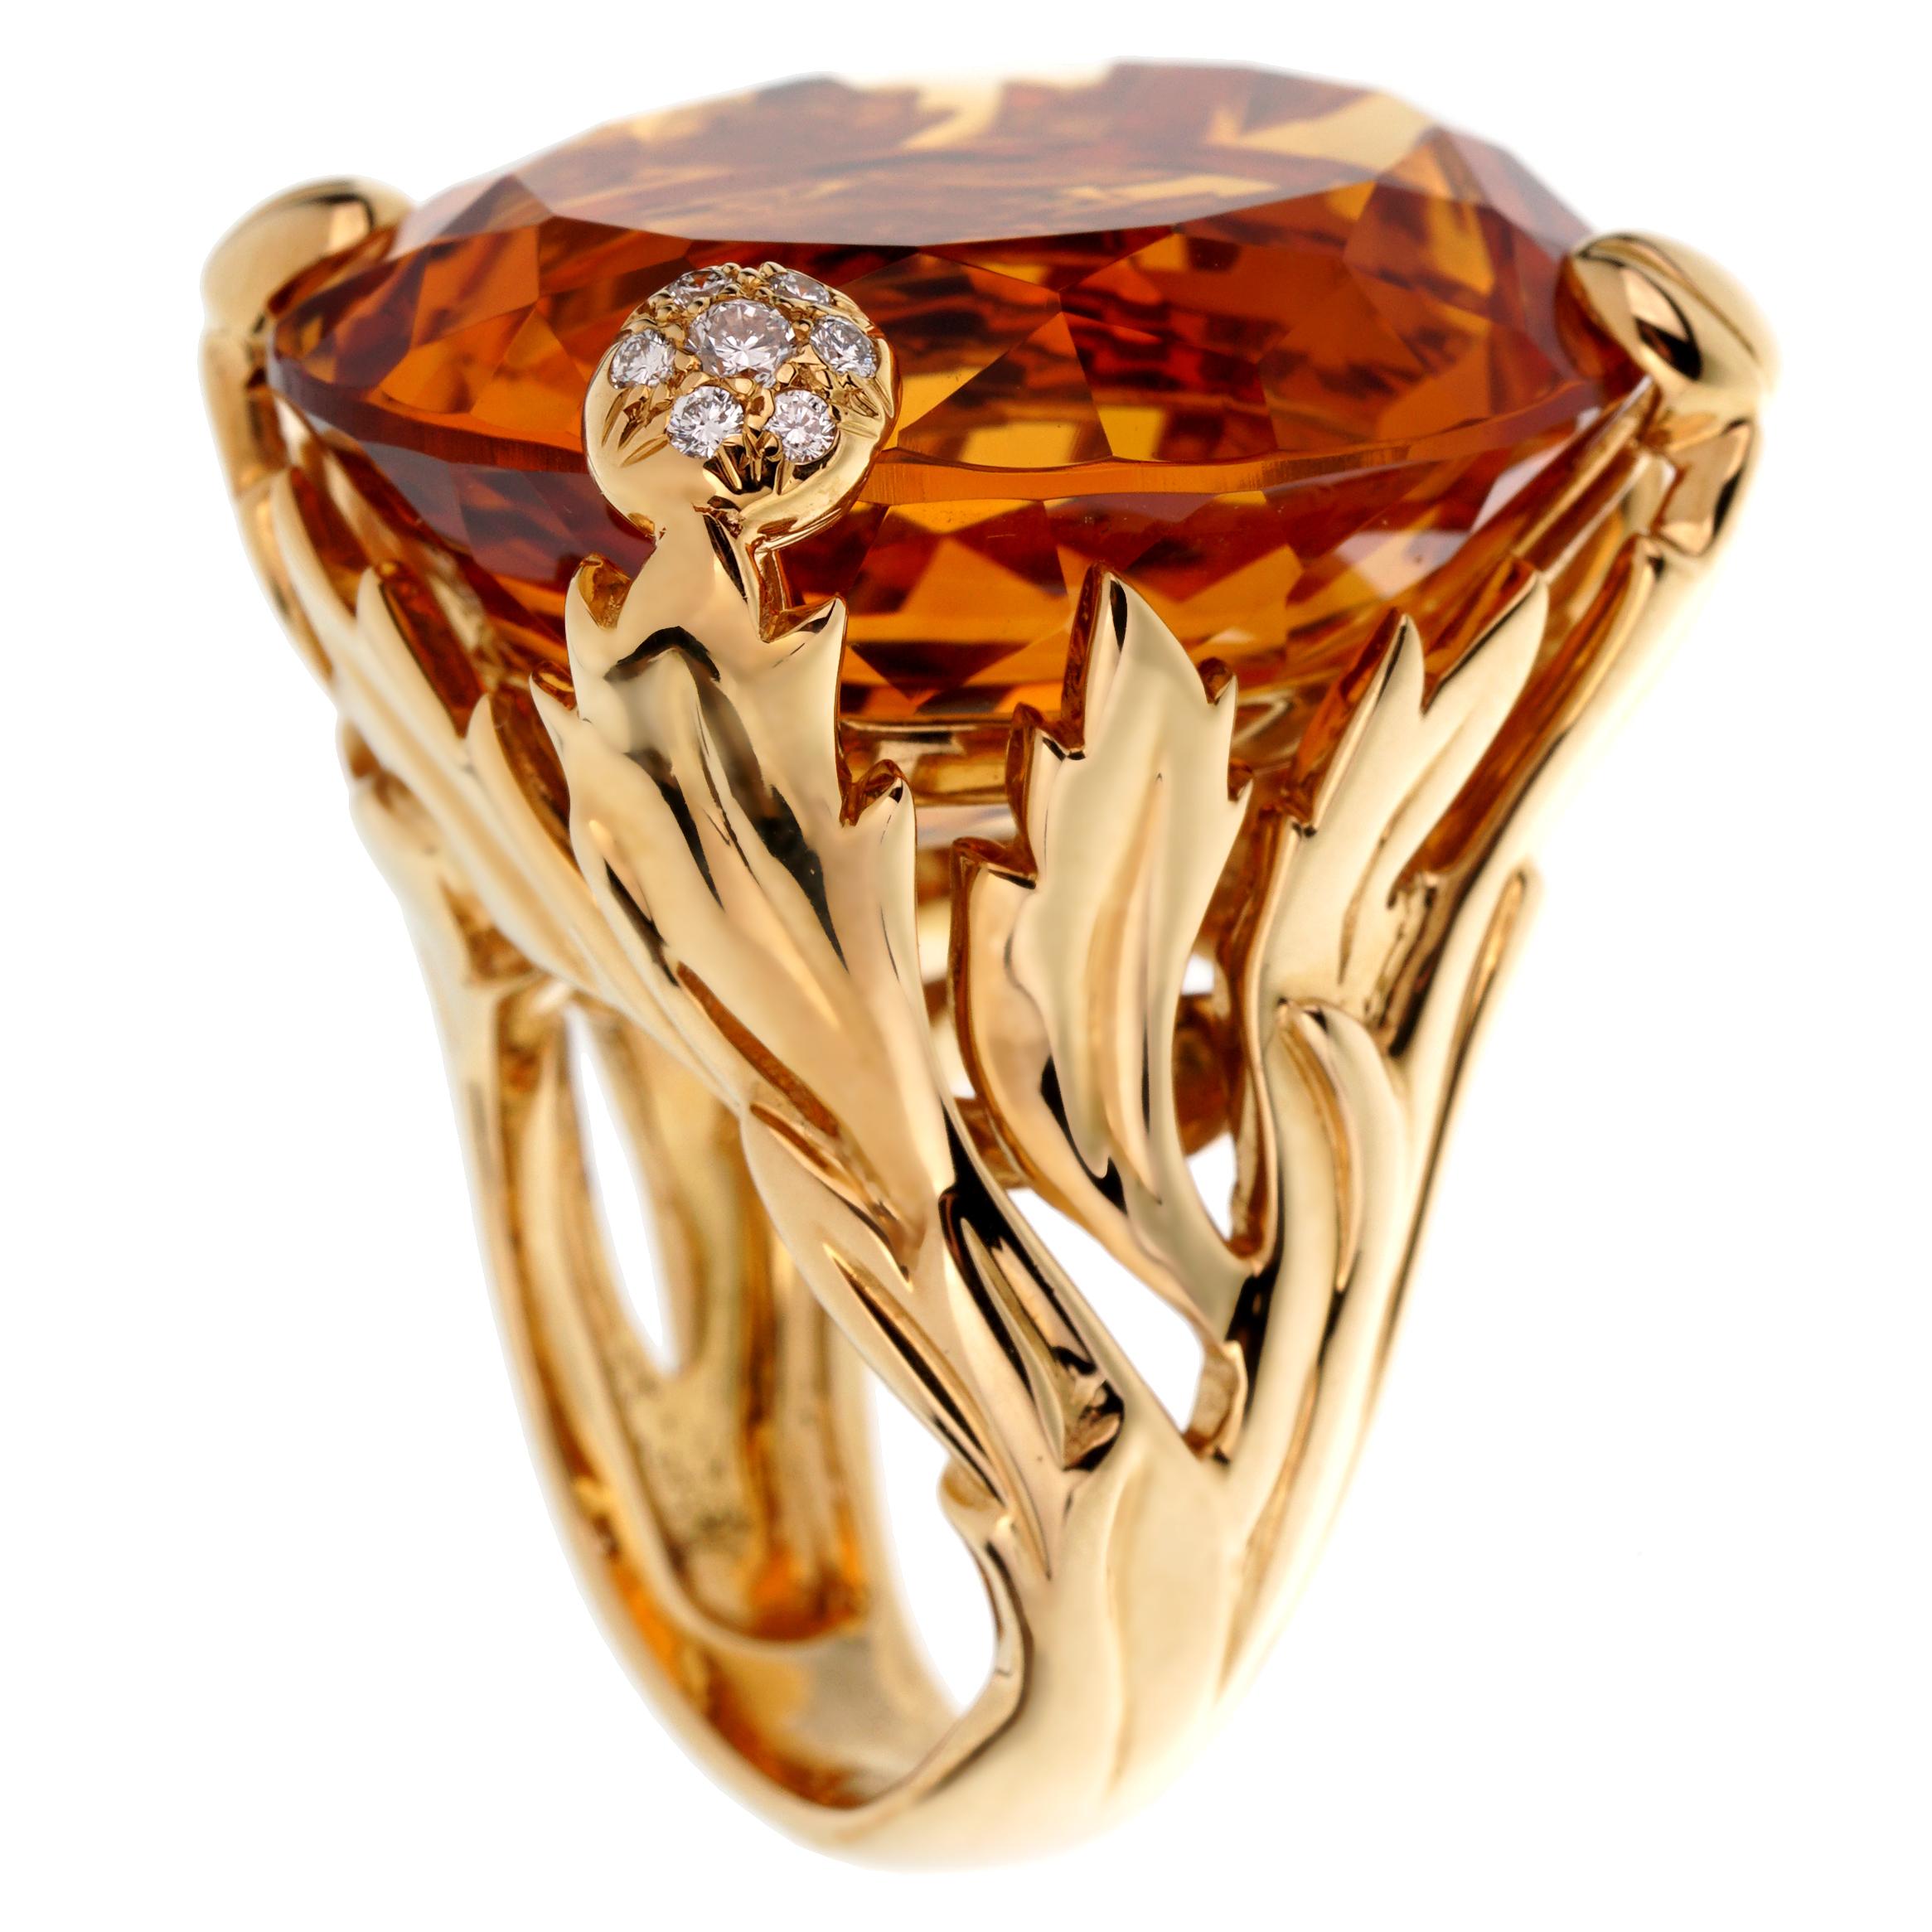 An incredible Christian Dior cocktail ring showcasing a 44.5ct oval citrine adorned by .12ct of the finest round brilliant cut diamonds in 18k yellow gold. The ring measures a size 5 1/2 and can be resized if needed.